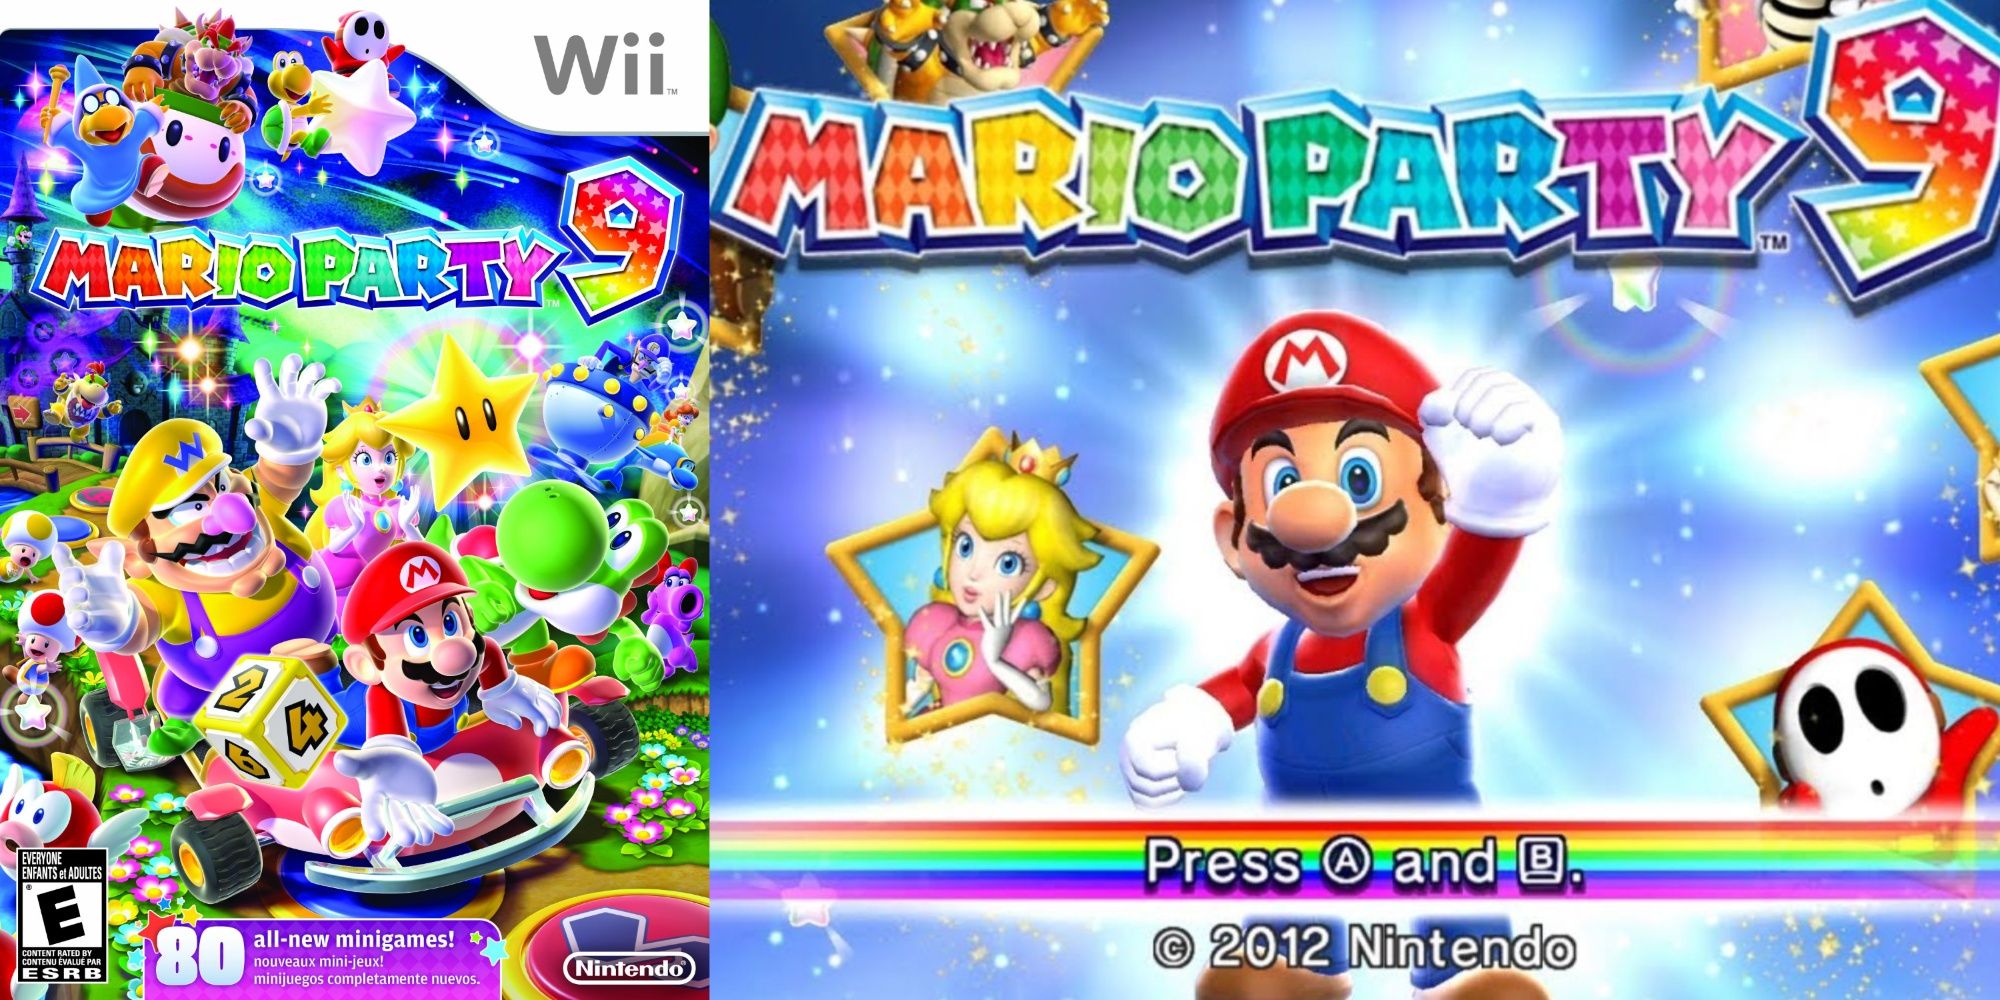 A split-image collage of the Wii cover for Mario Party 9 and the main title menu with Mario raising a fist.